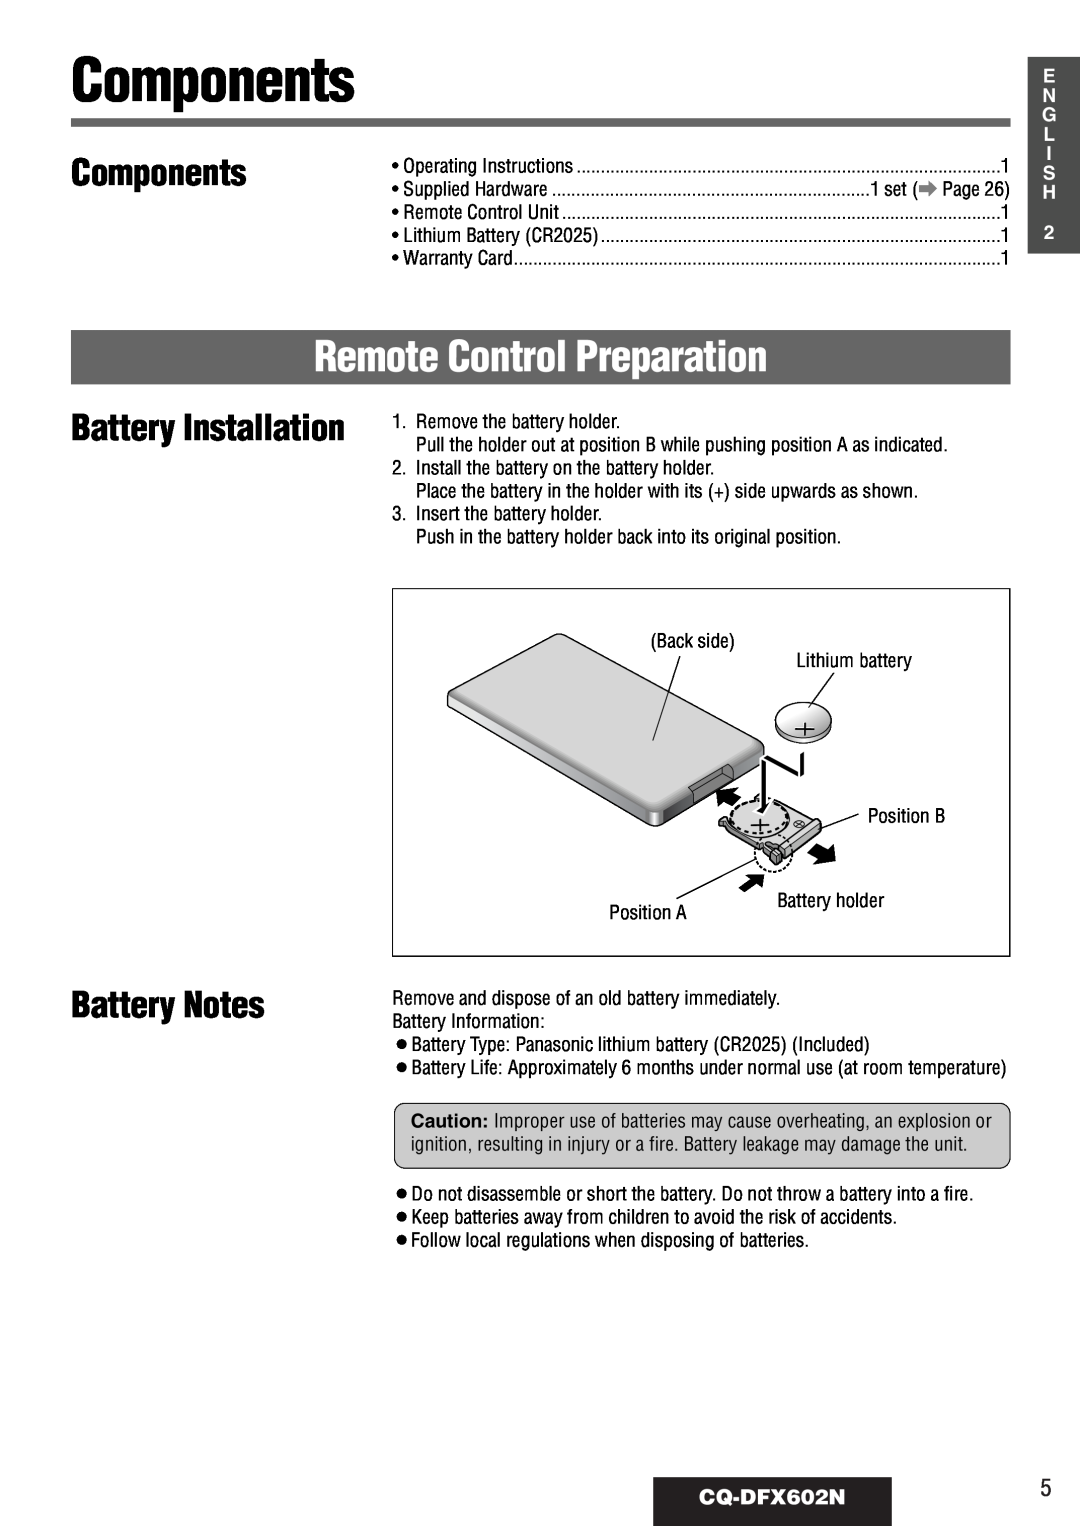 Panasonic manual Remote Control Preparation, Components, Battery Notes, Battery Installation, CQ-DFX602N5, E N G L I S H 